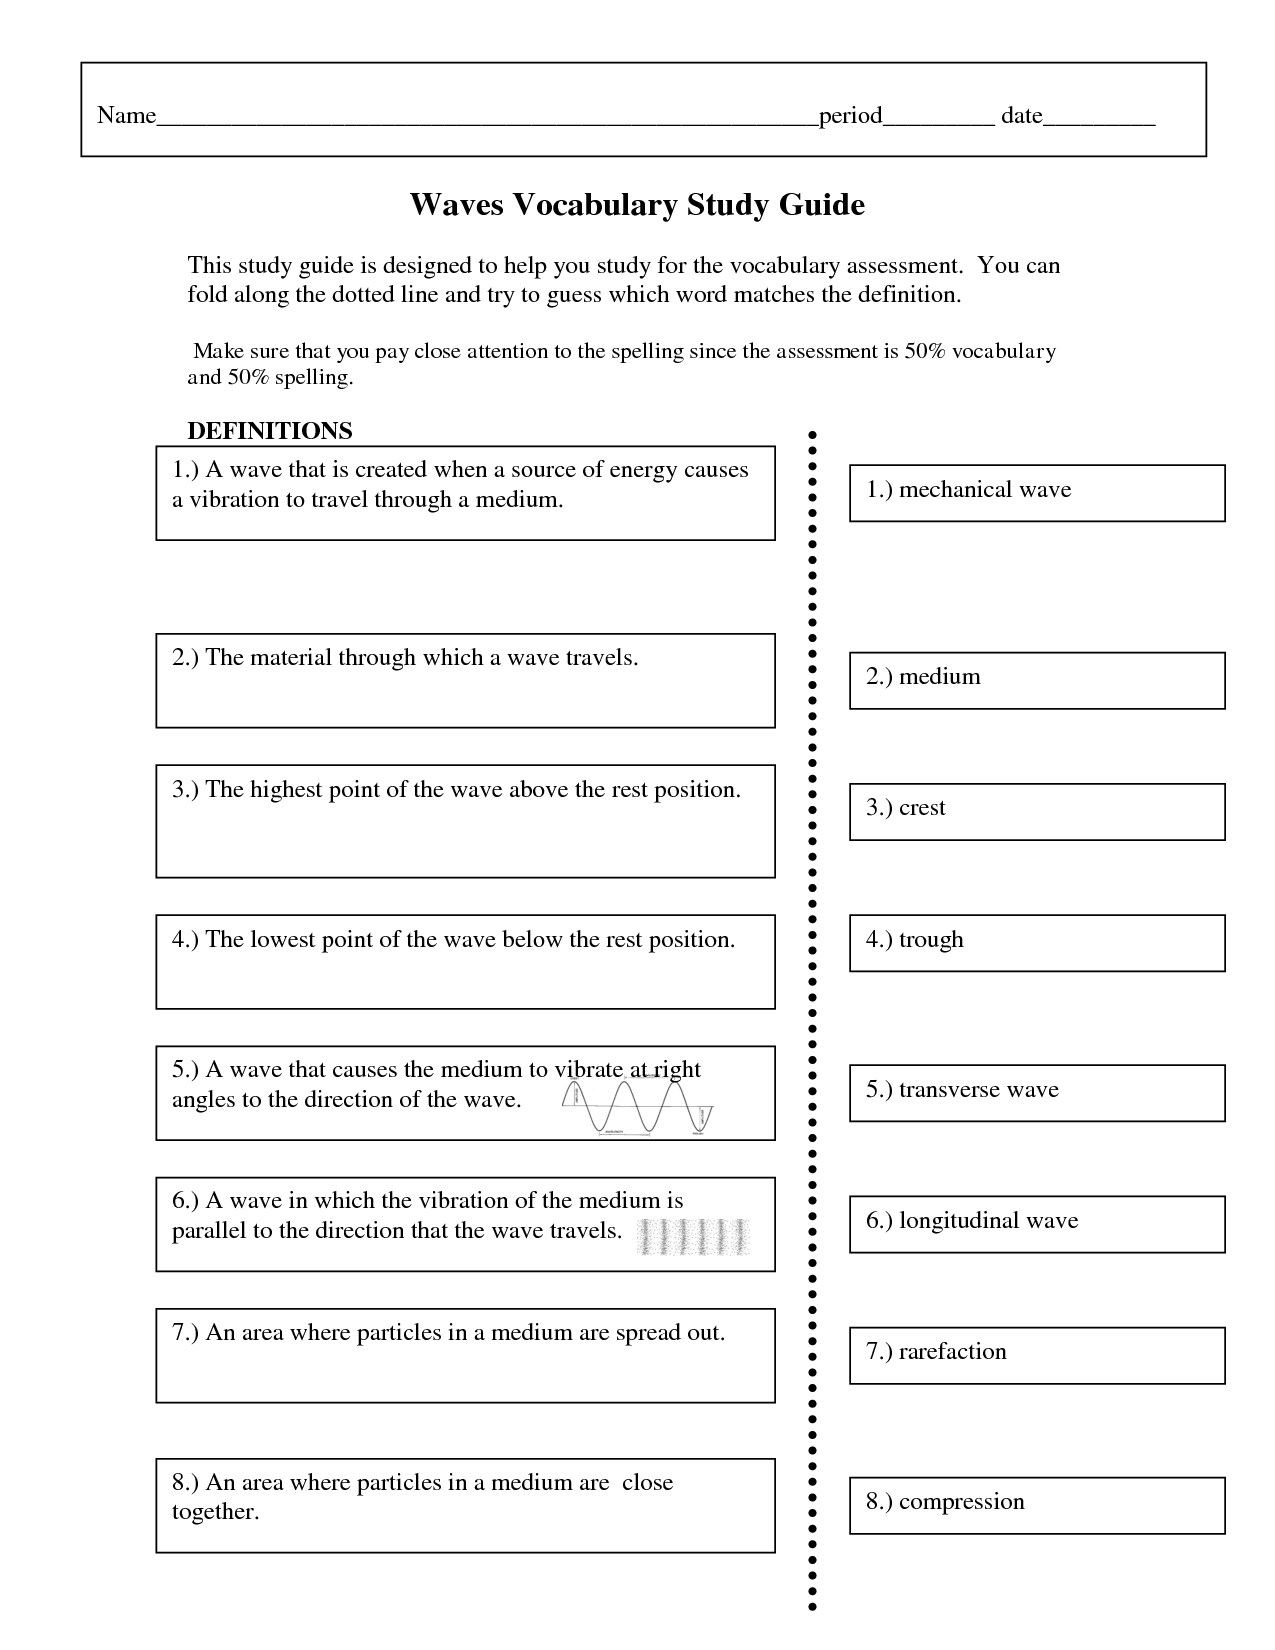 17-best-images-of-dna-vocabulary-worksheet-chapter-11-introduction-to-genetics-worksheet